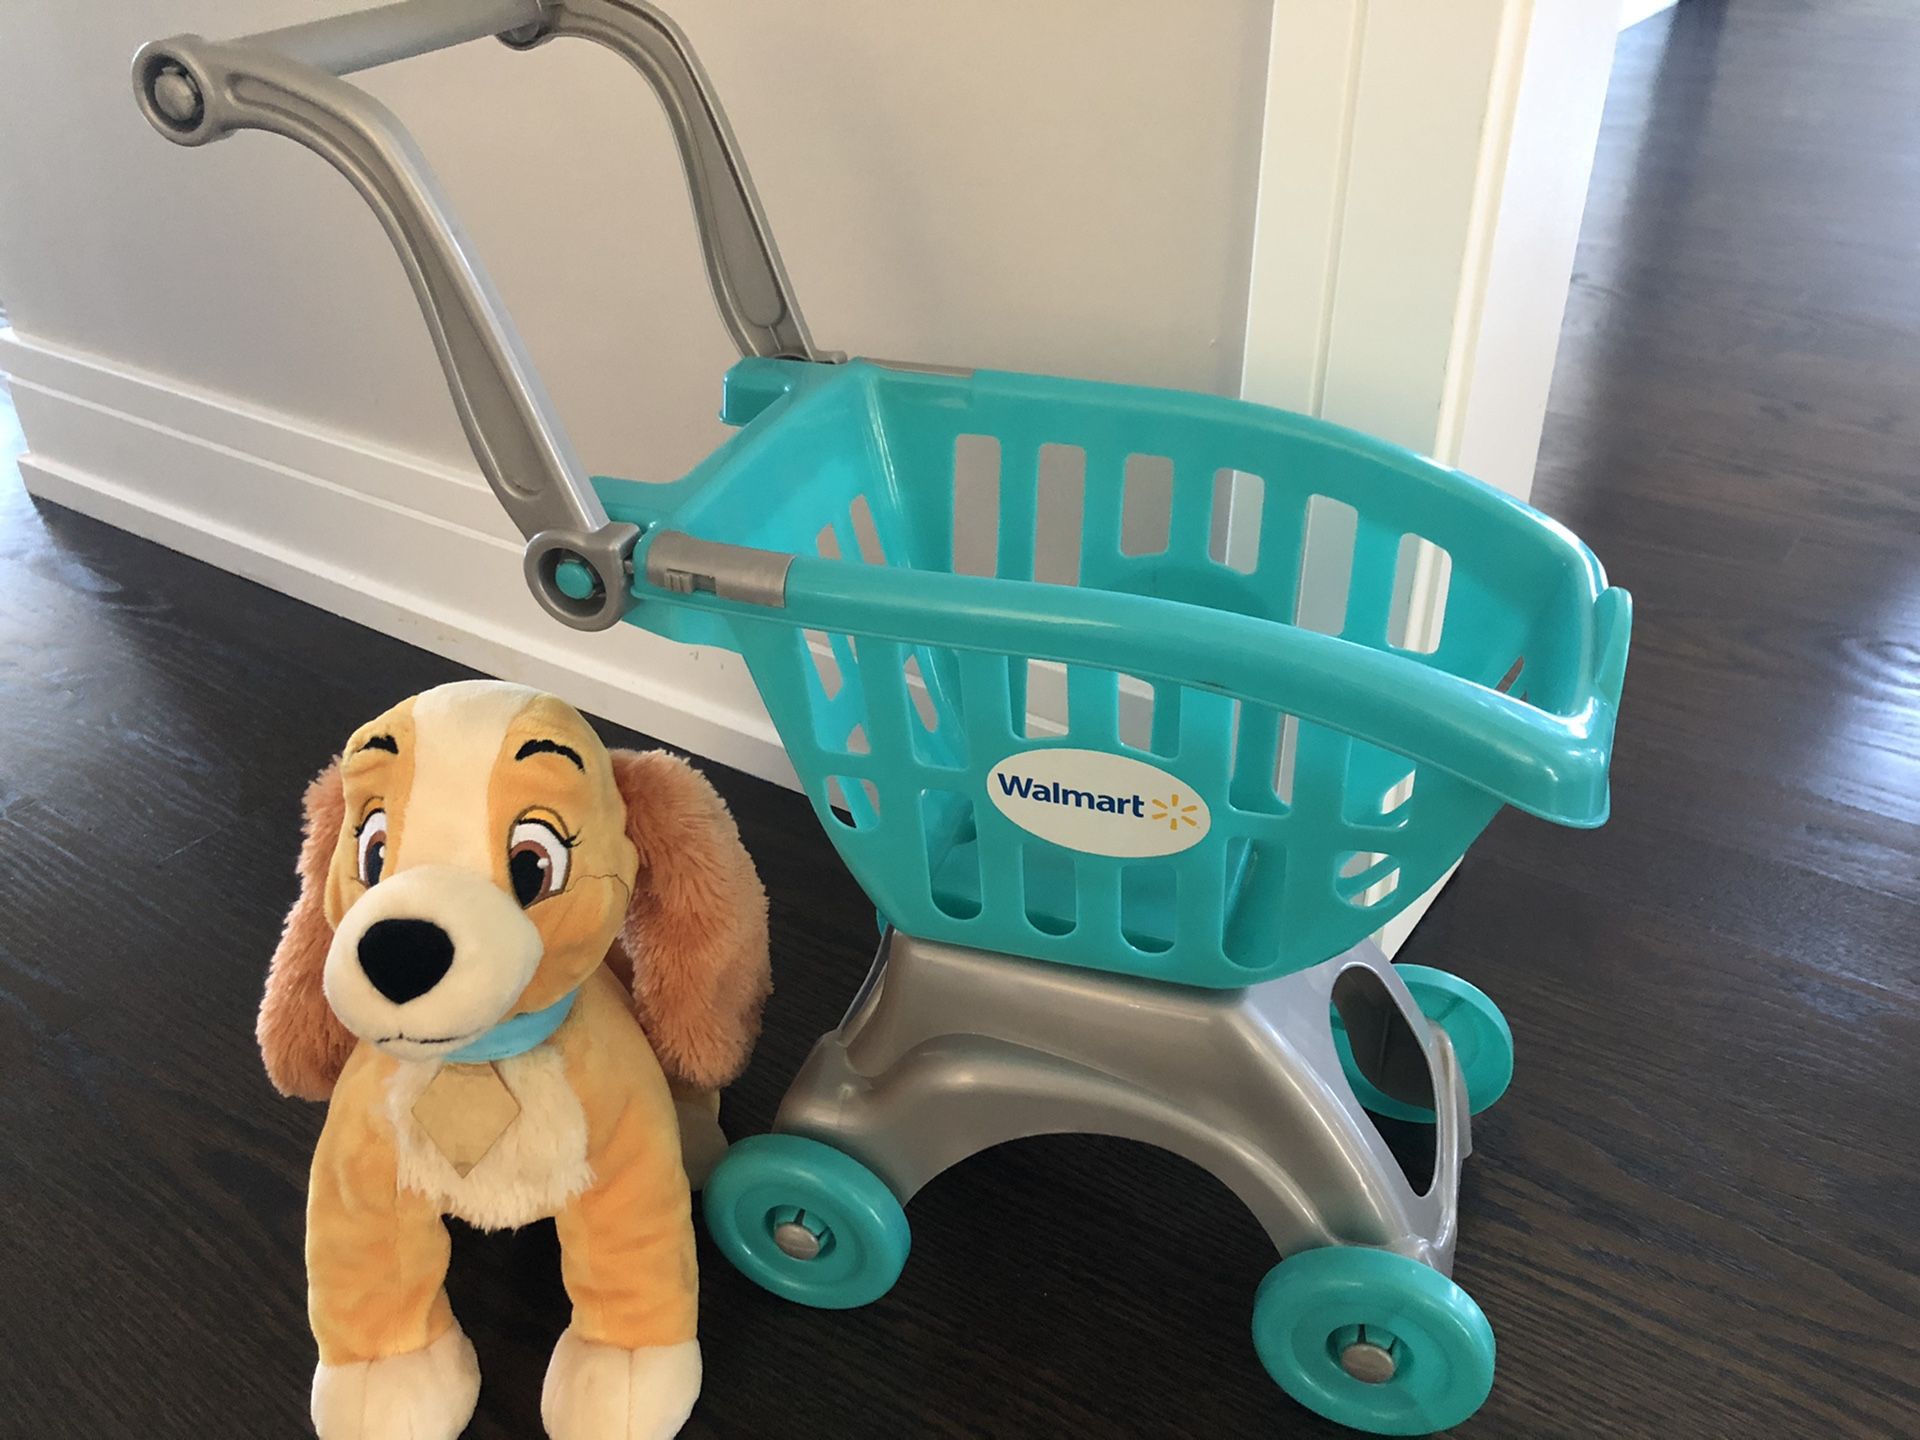 CART AND PLUSHY TOY